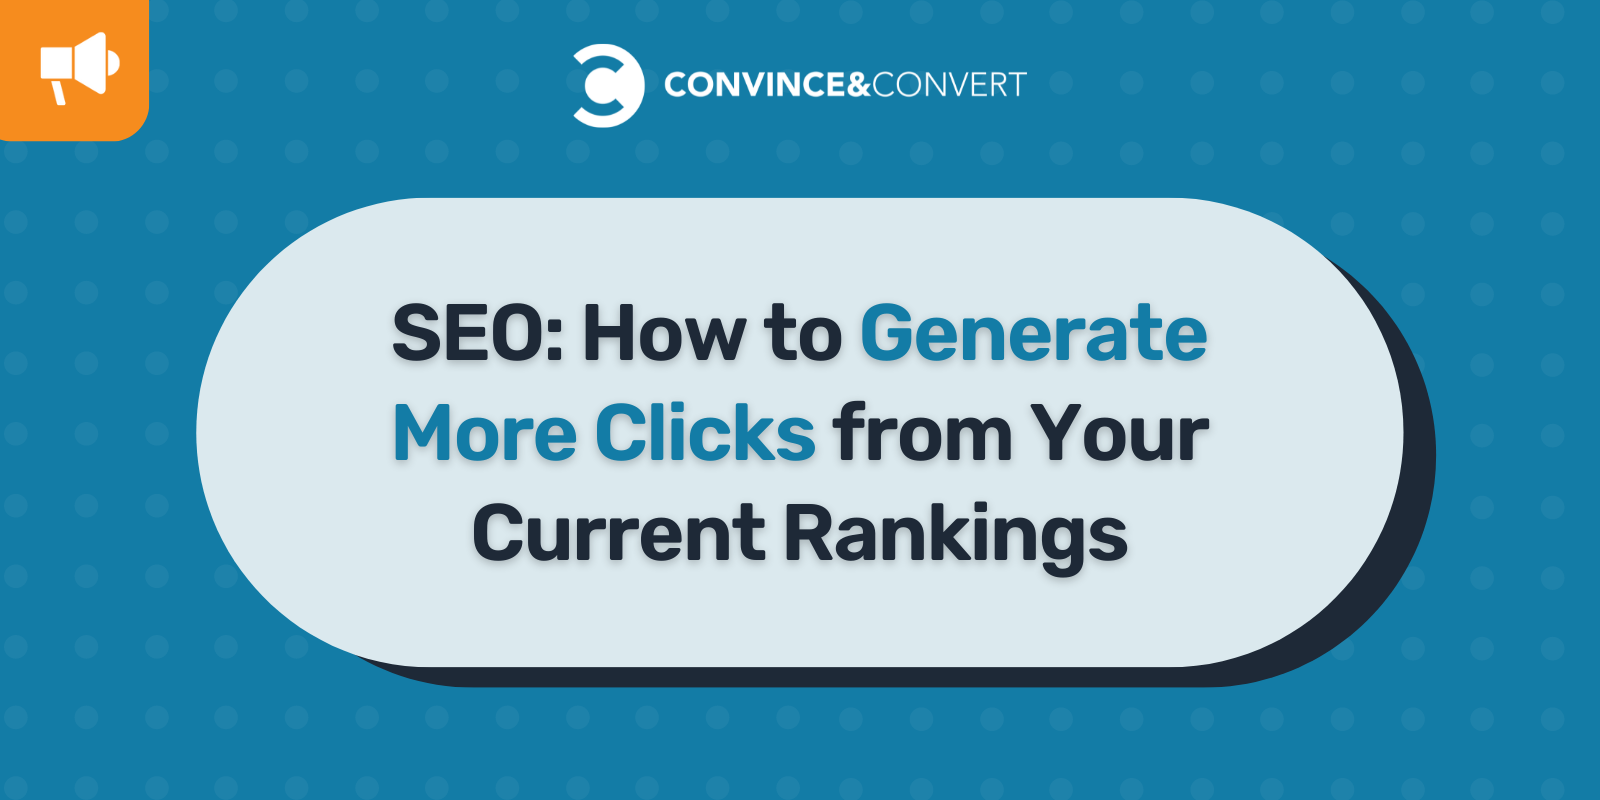 SEO: How to Generate More Clicks from Your Current Rankings